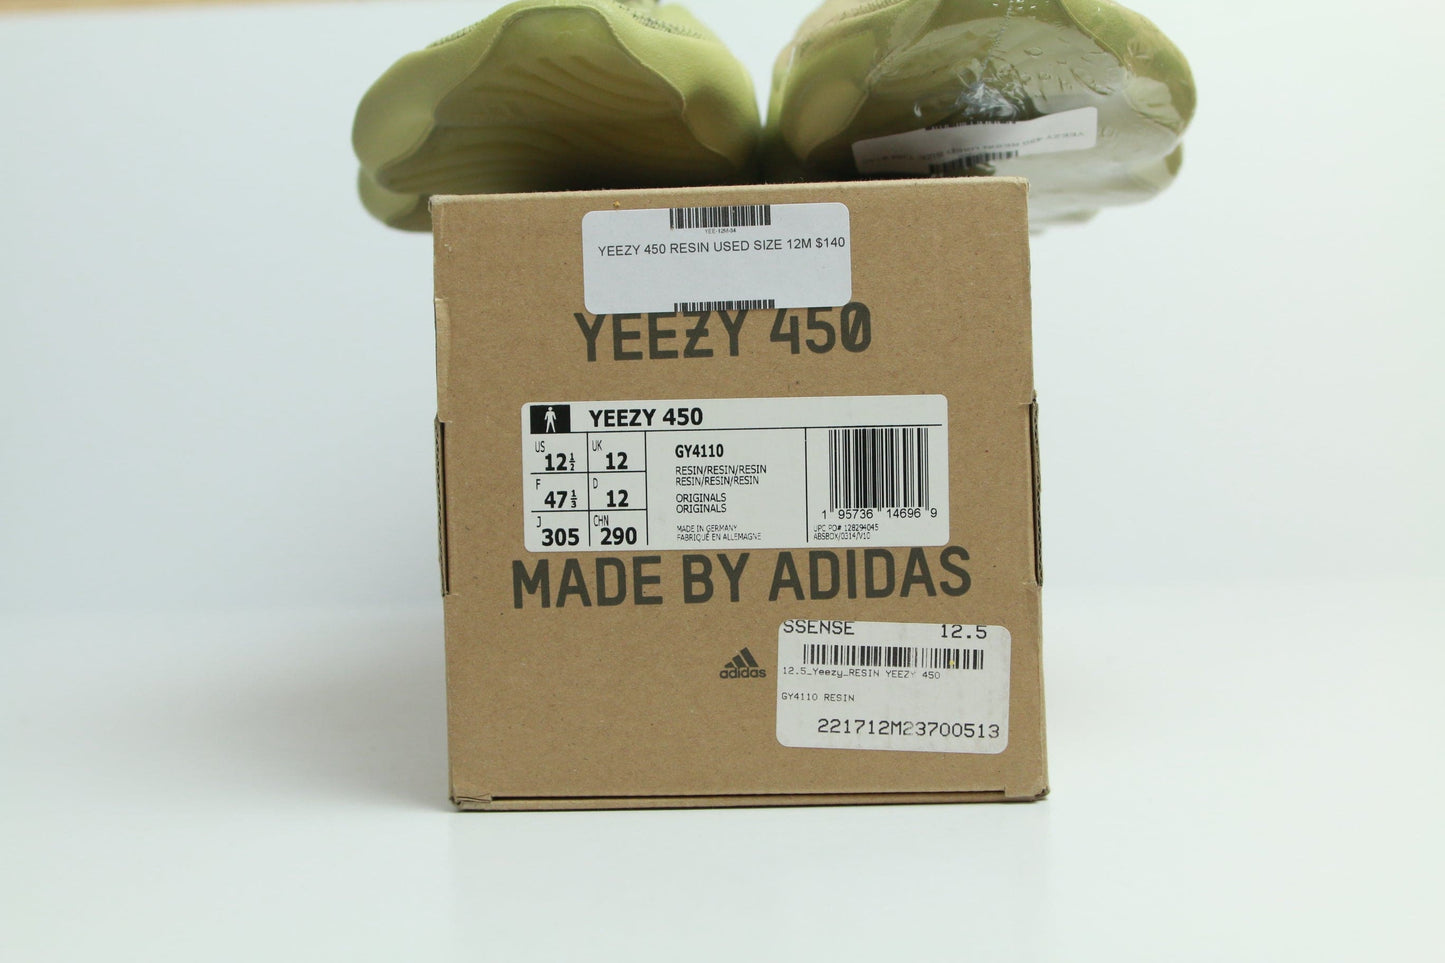 YEEZY 450 RESIN USED SIZE 12M